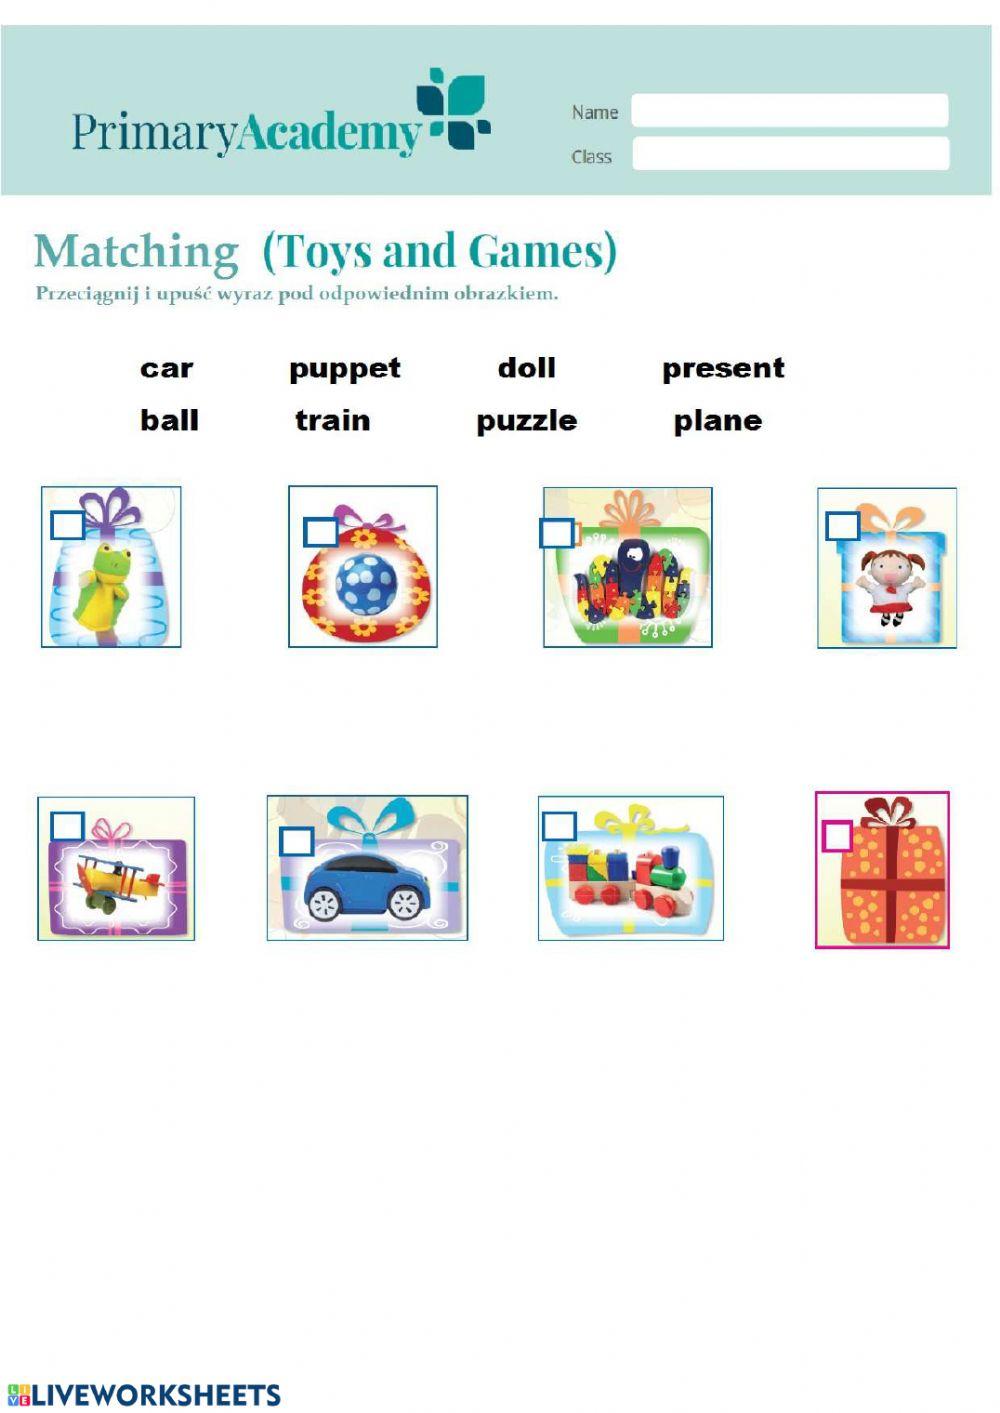 Toys and games 1